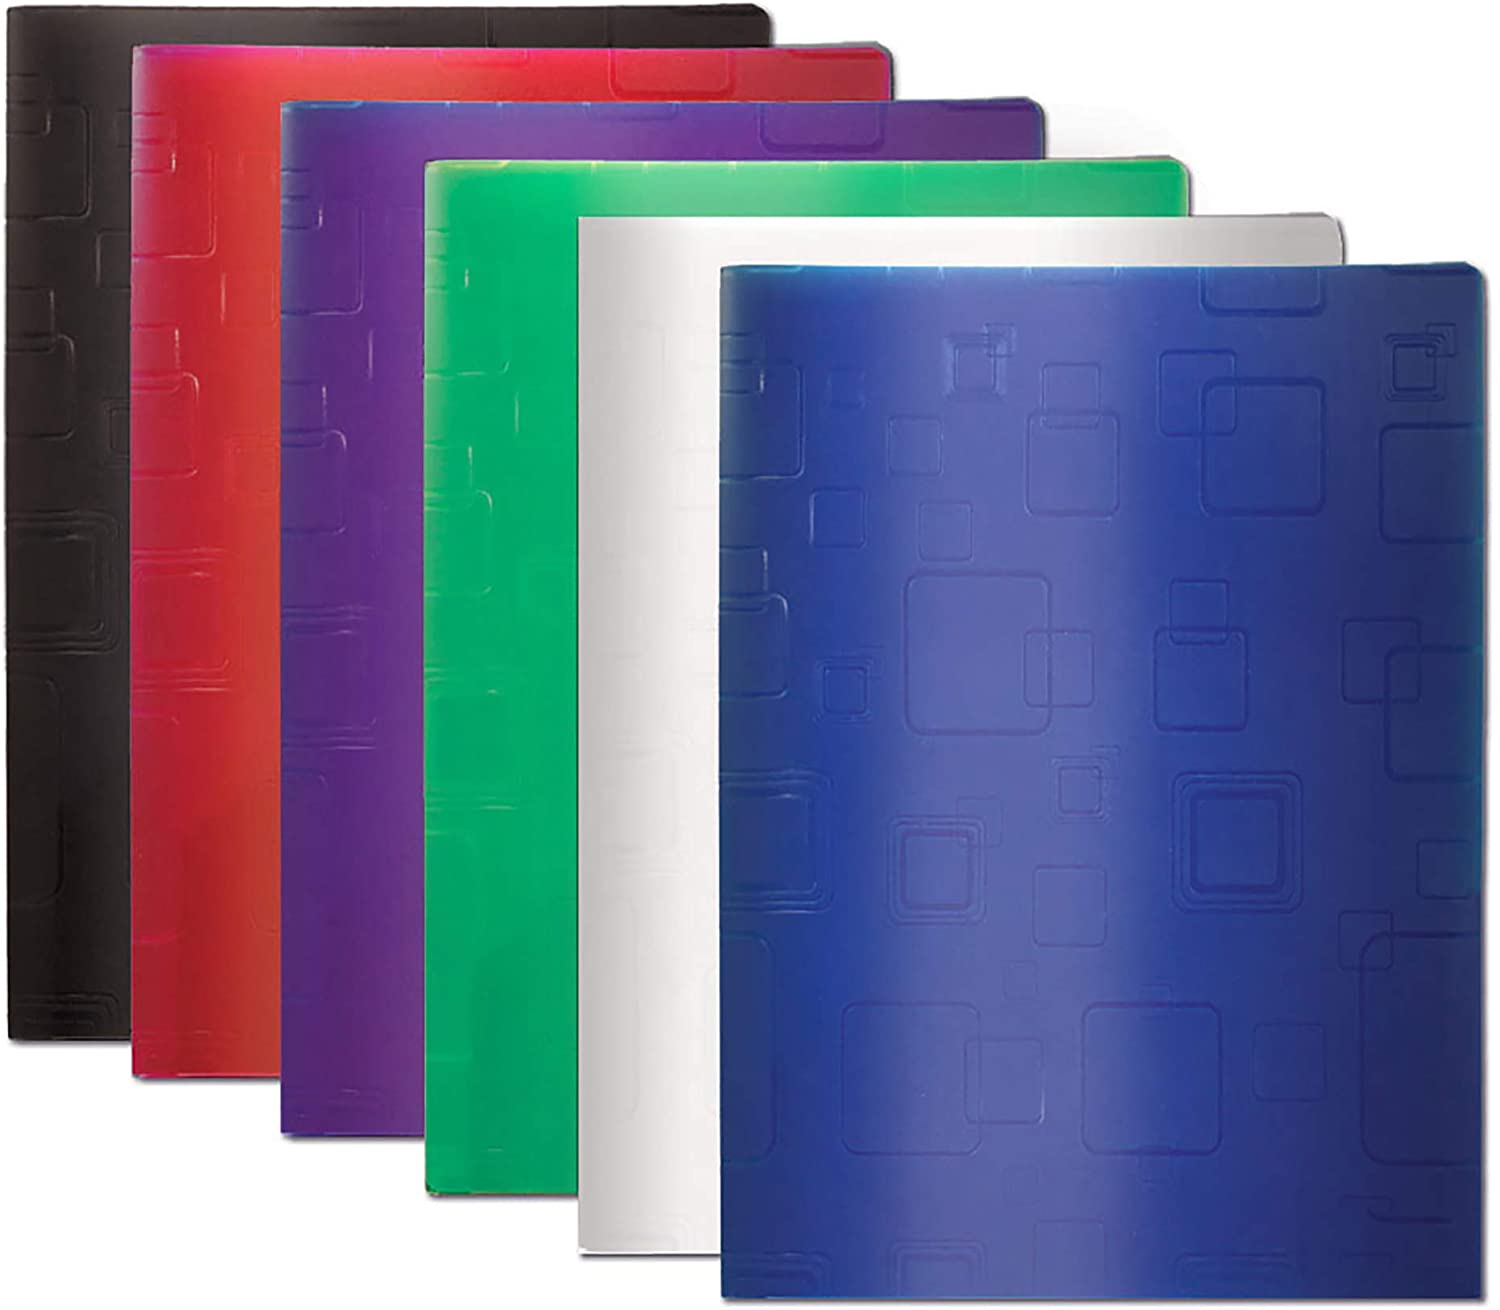 BAZIC Bubble Embossed 2-Pockets Poly Portfolio, Letter Size Assorted Colors Plastic Folder Holder Padfolio for Resume Interview Office Business Legal Document Papers Organizer, 6-Pack.